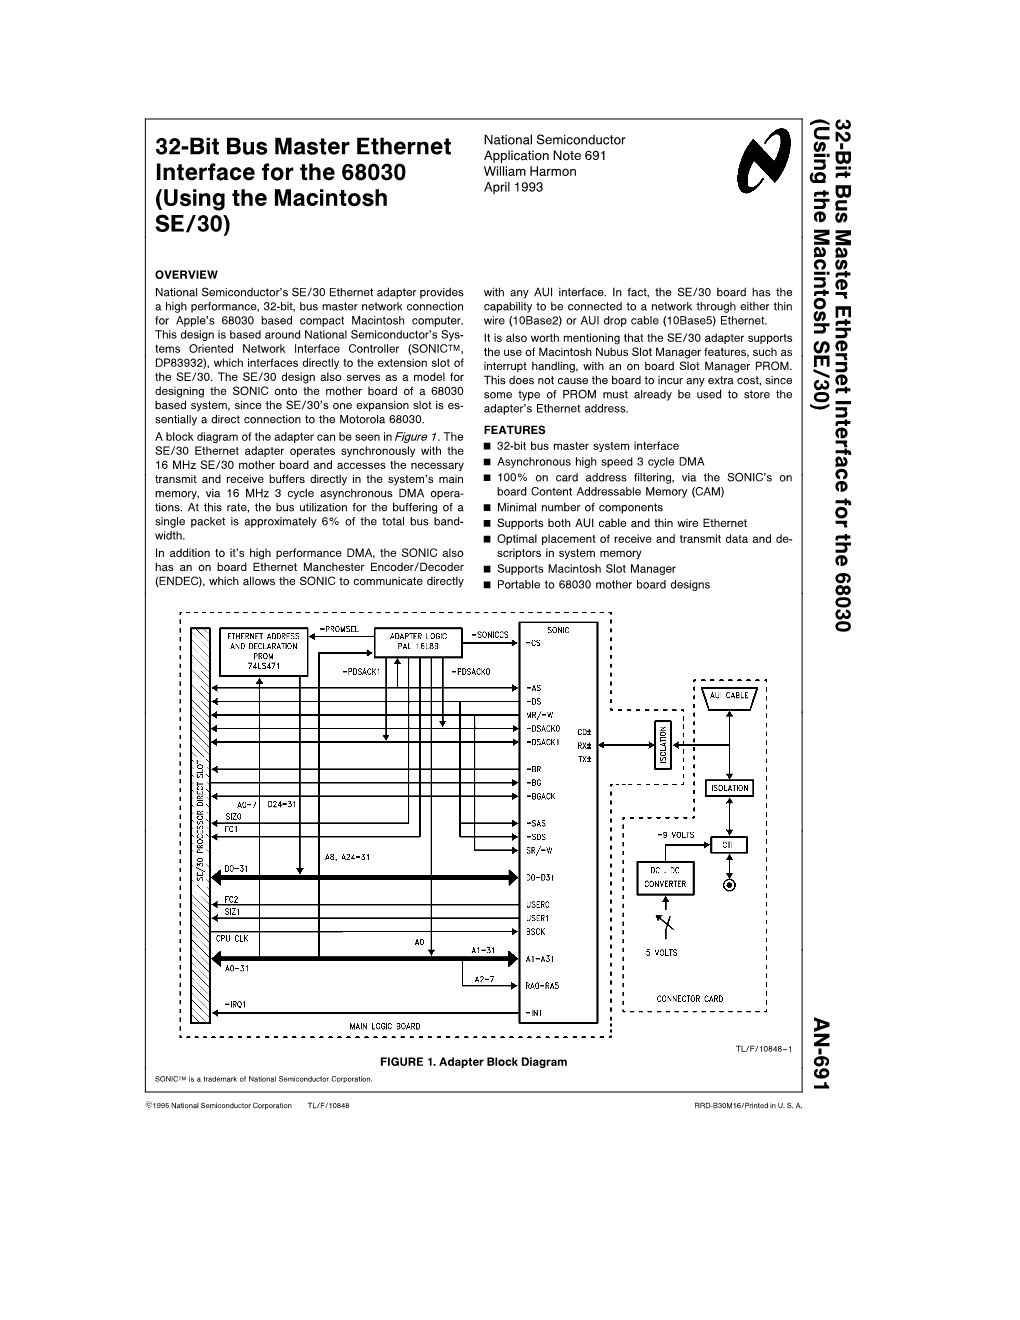 32-Bit Bus Master Ethernet Interface for the 68030